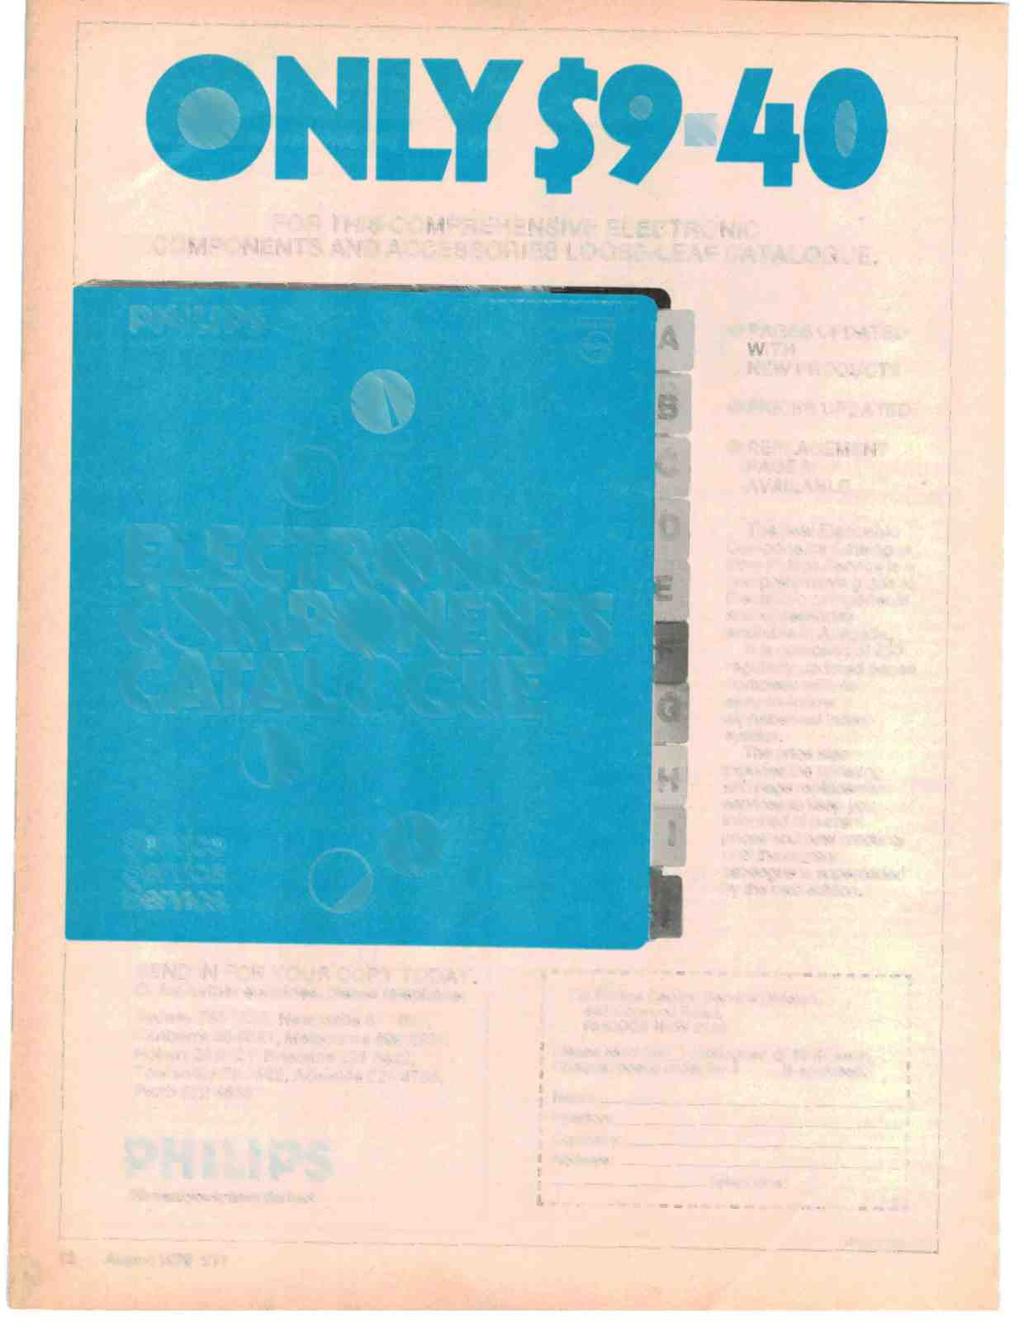 FOR THIS COMPREHENSIVE ELECTRONIC COMPONENTS AND ACCESSORIES LOOSE-LEAF CATALOGUE. PHILIPS o 0 1.N111V ELEST O C C, ITS CATALOGUE ',k:1í"9i:11; h ;.